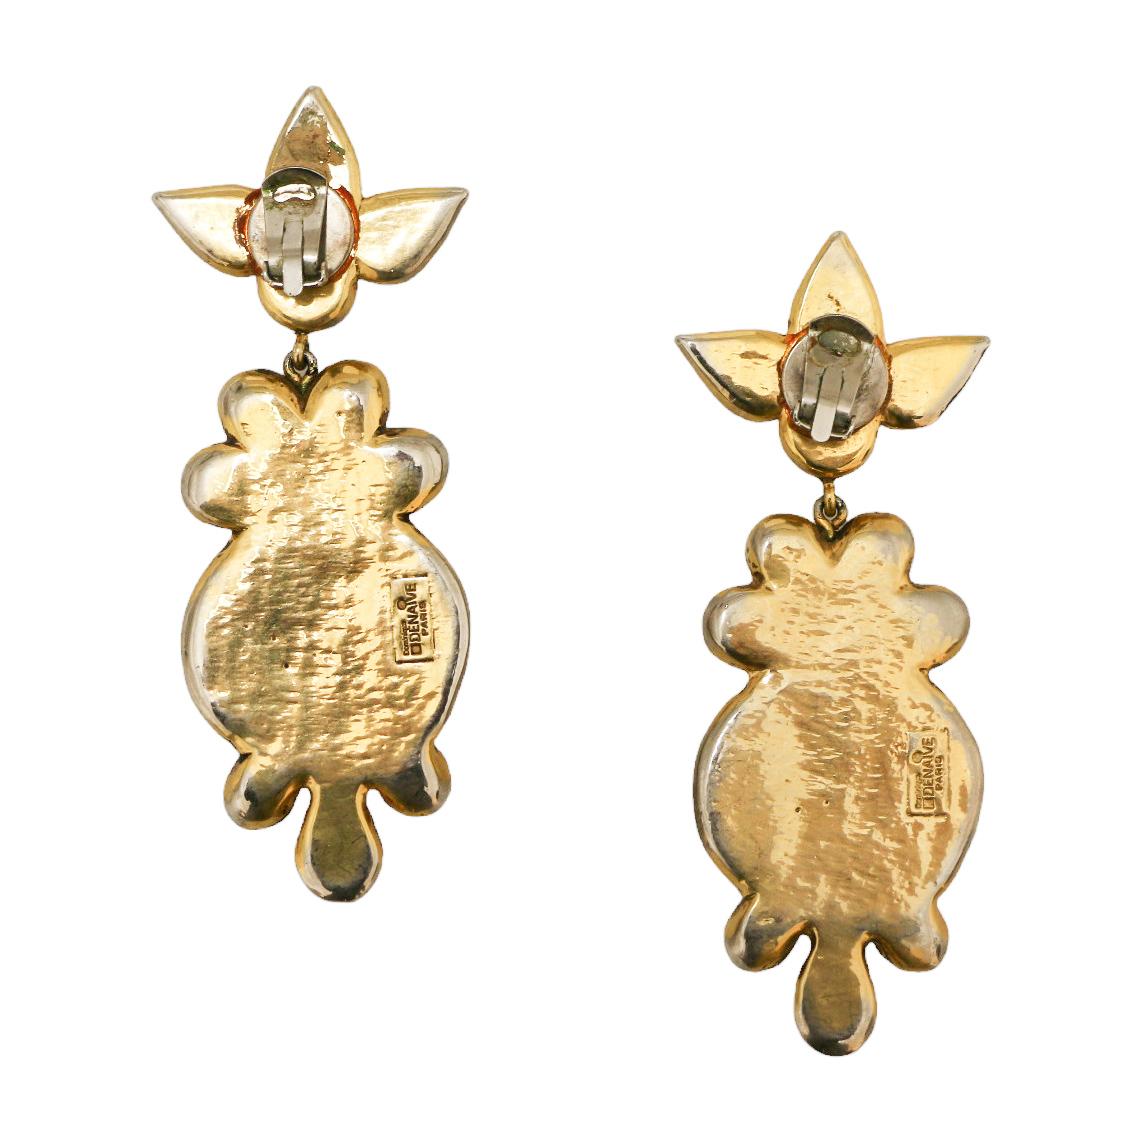 Beautiful clip-on earrings by D. DENAIVE gold-plated pendants
Condition: good
Made in France
Material: resin, crystals
Color: gold, violet, green
Dimensions: 3.5 x 11 cm
Hardware: vintage gold-plated metal 
Stamp: yes
Year: vintage
Details :